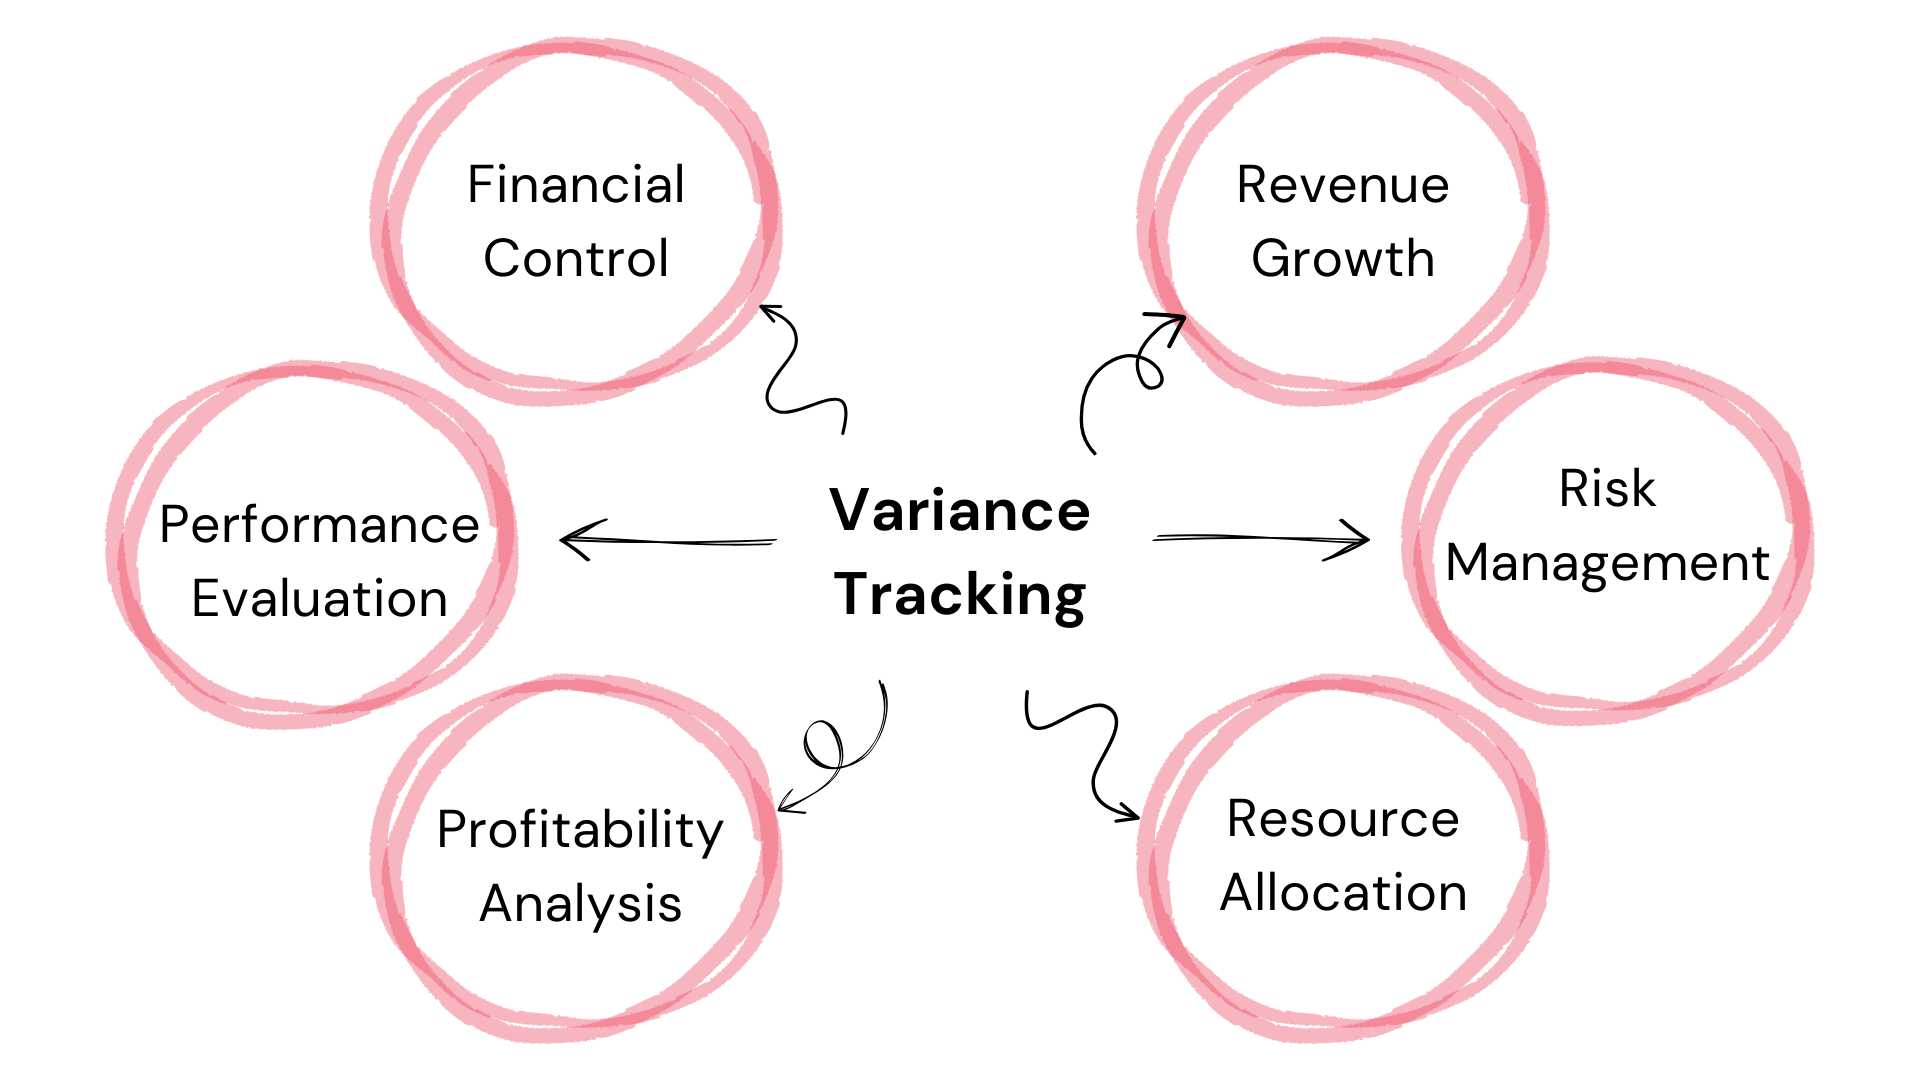 Variance Tracking